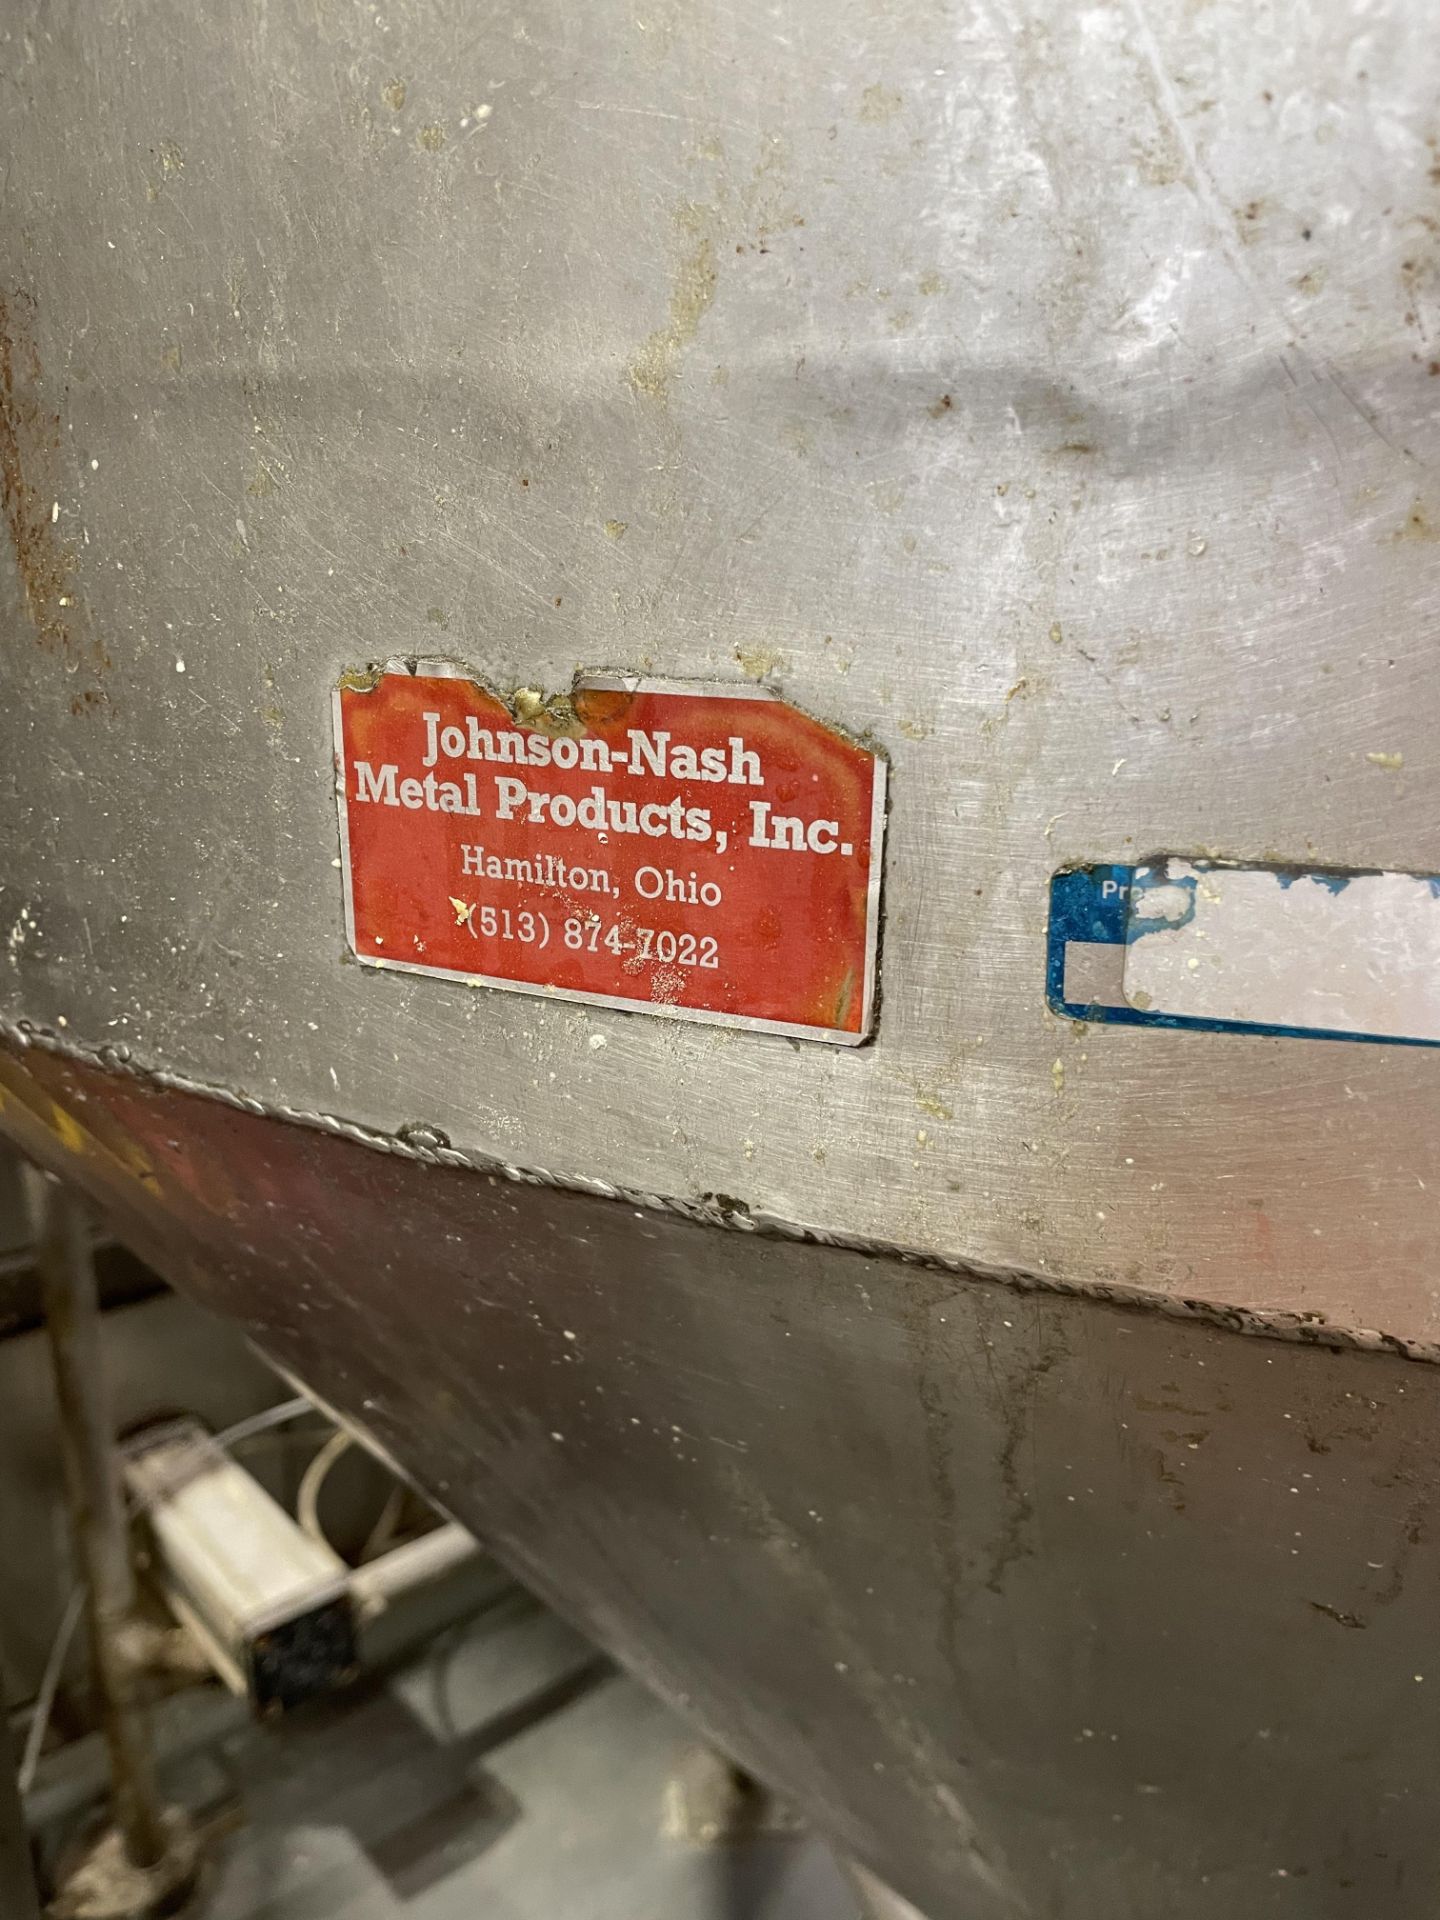 Johnson Nash Metal Products Hopper Tank to Feed Oakes Mixer, Loading Fee: $1100 - Image 5 of 5